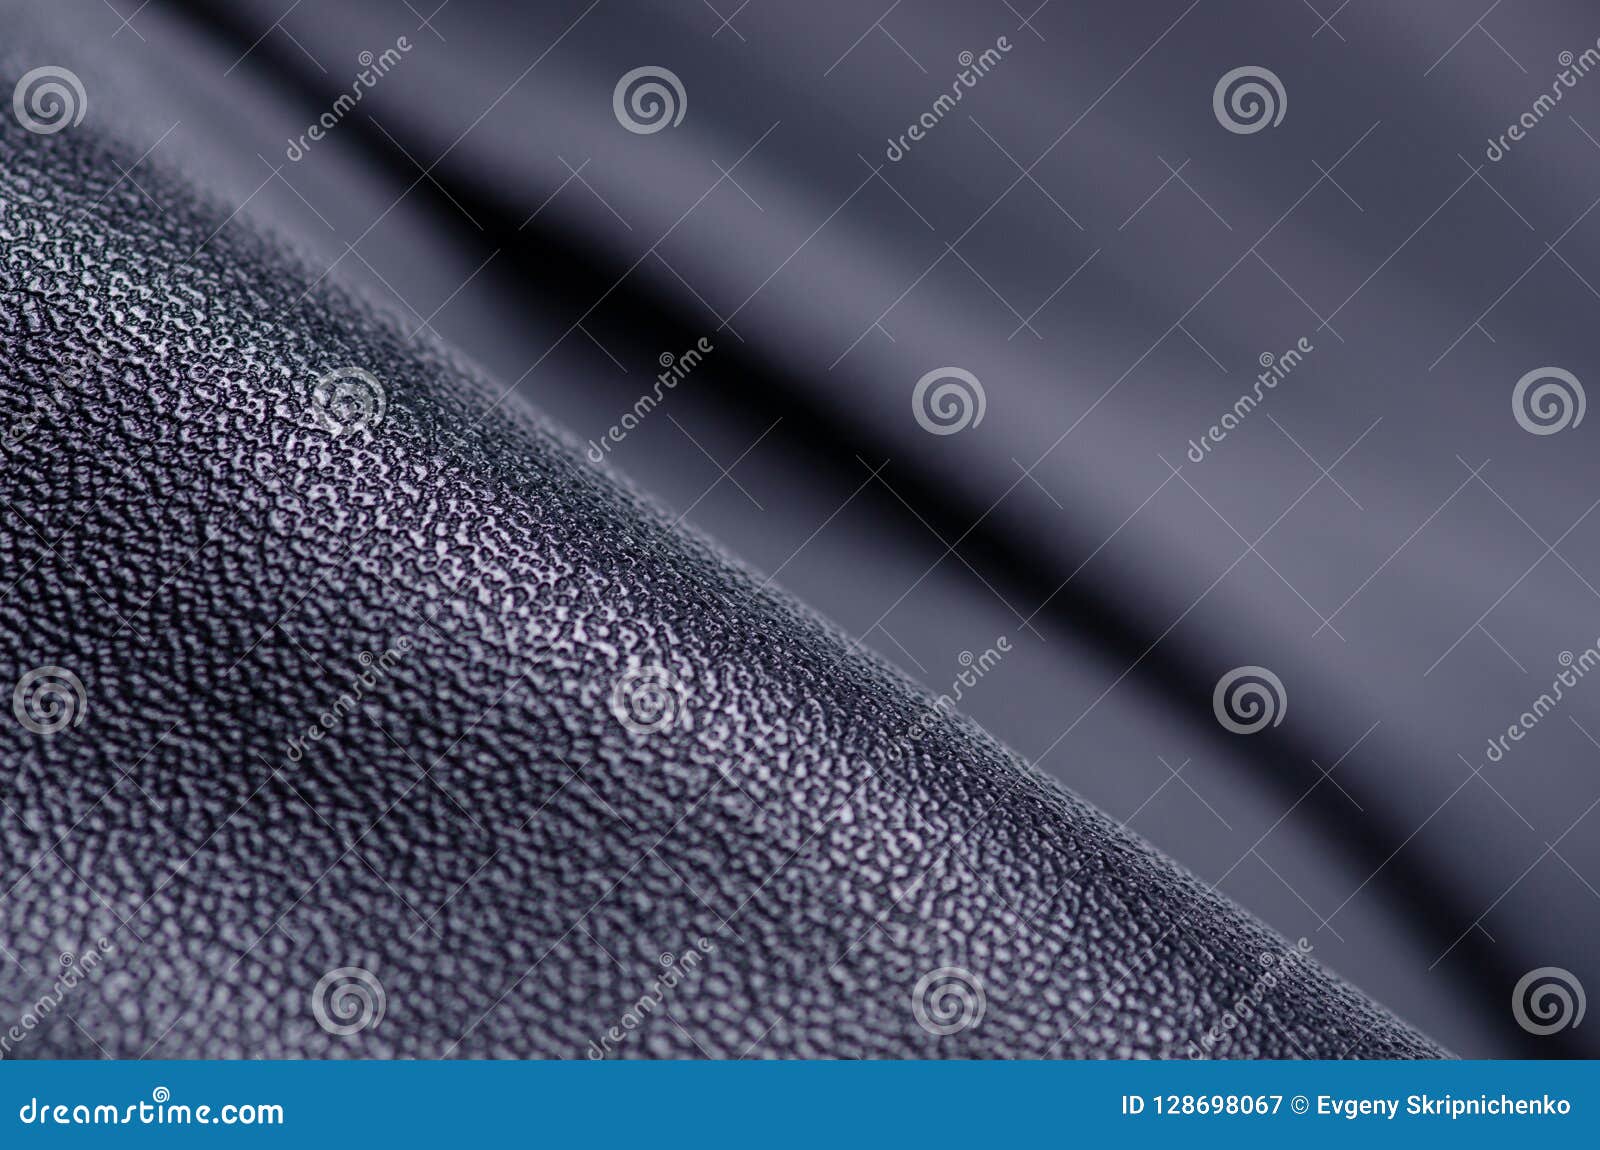 Black Leather Fabric Textile Material Texture Macro Stock Image - Image ...